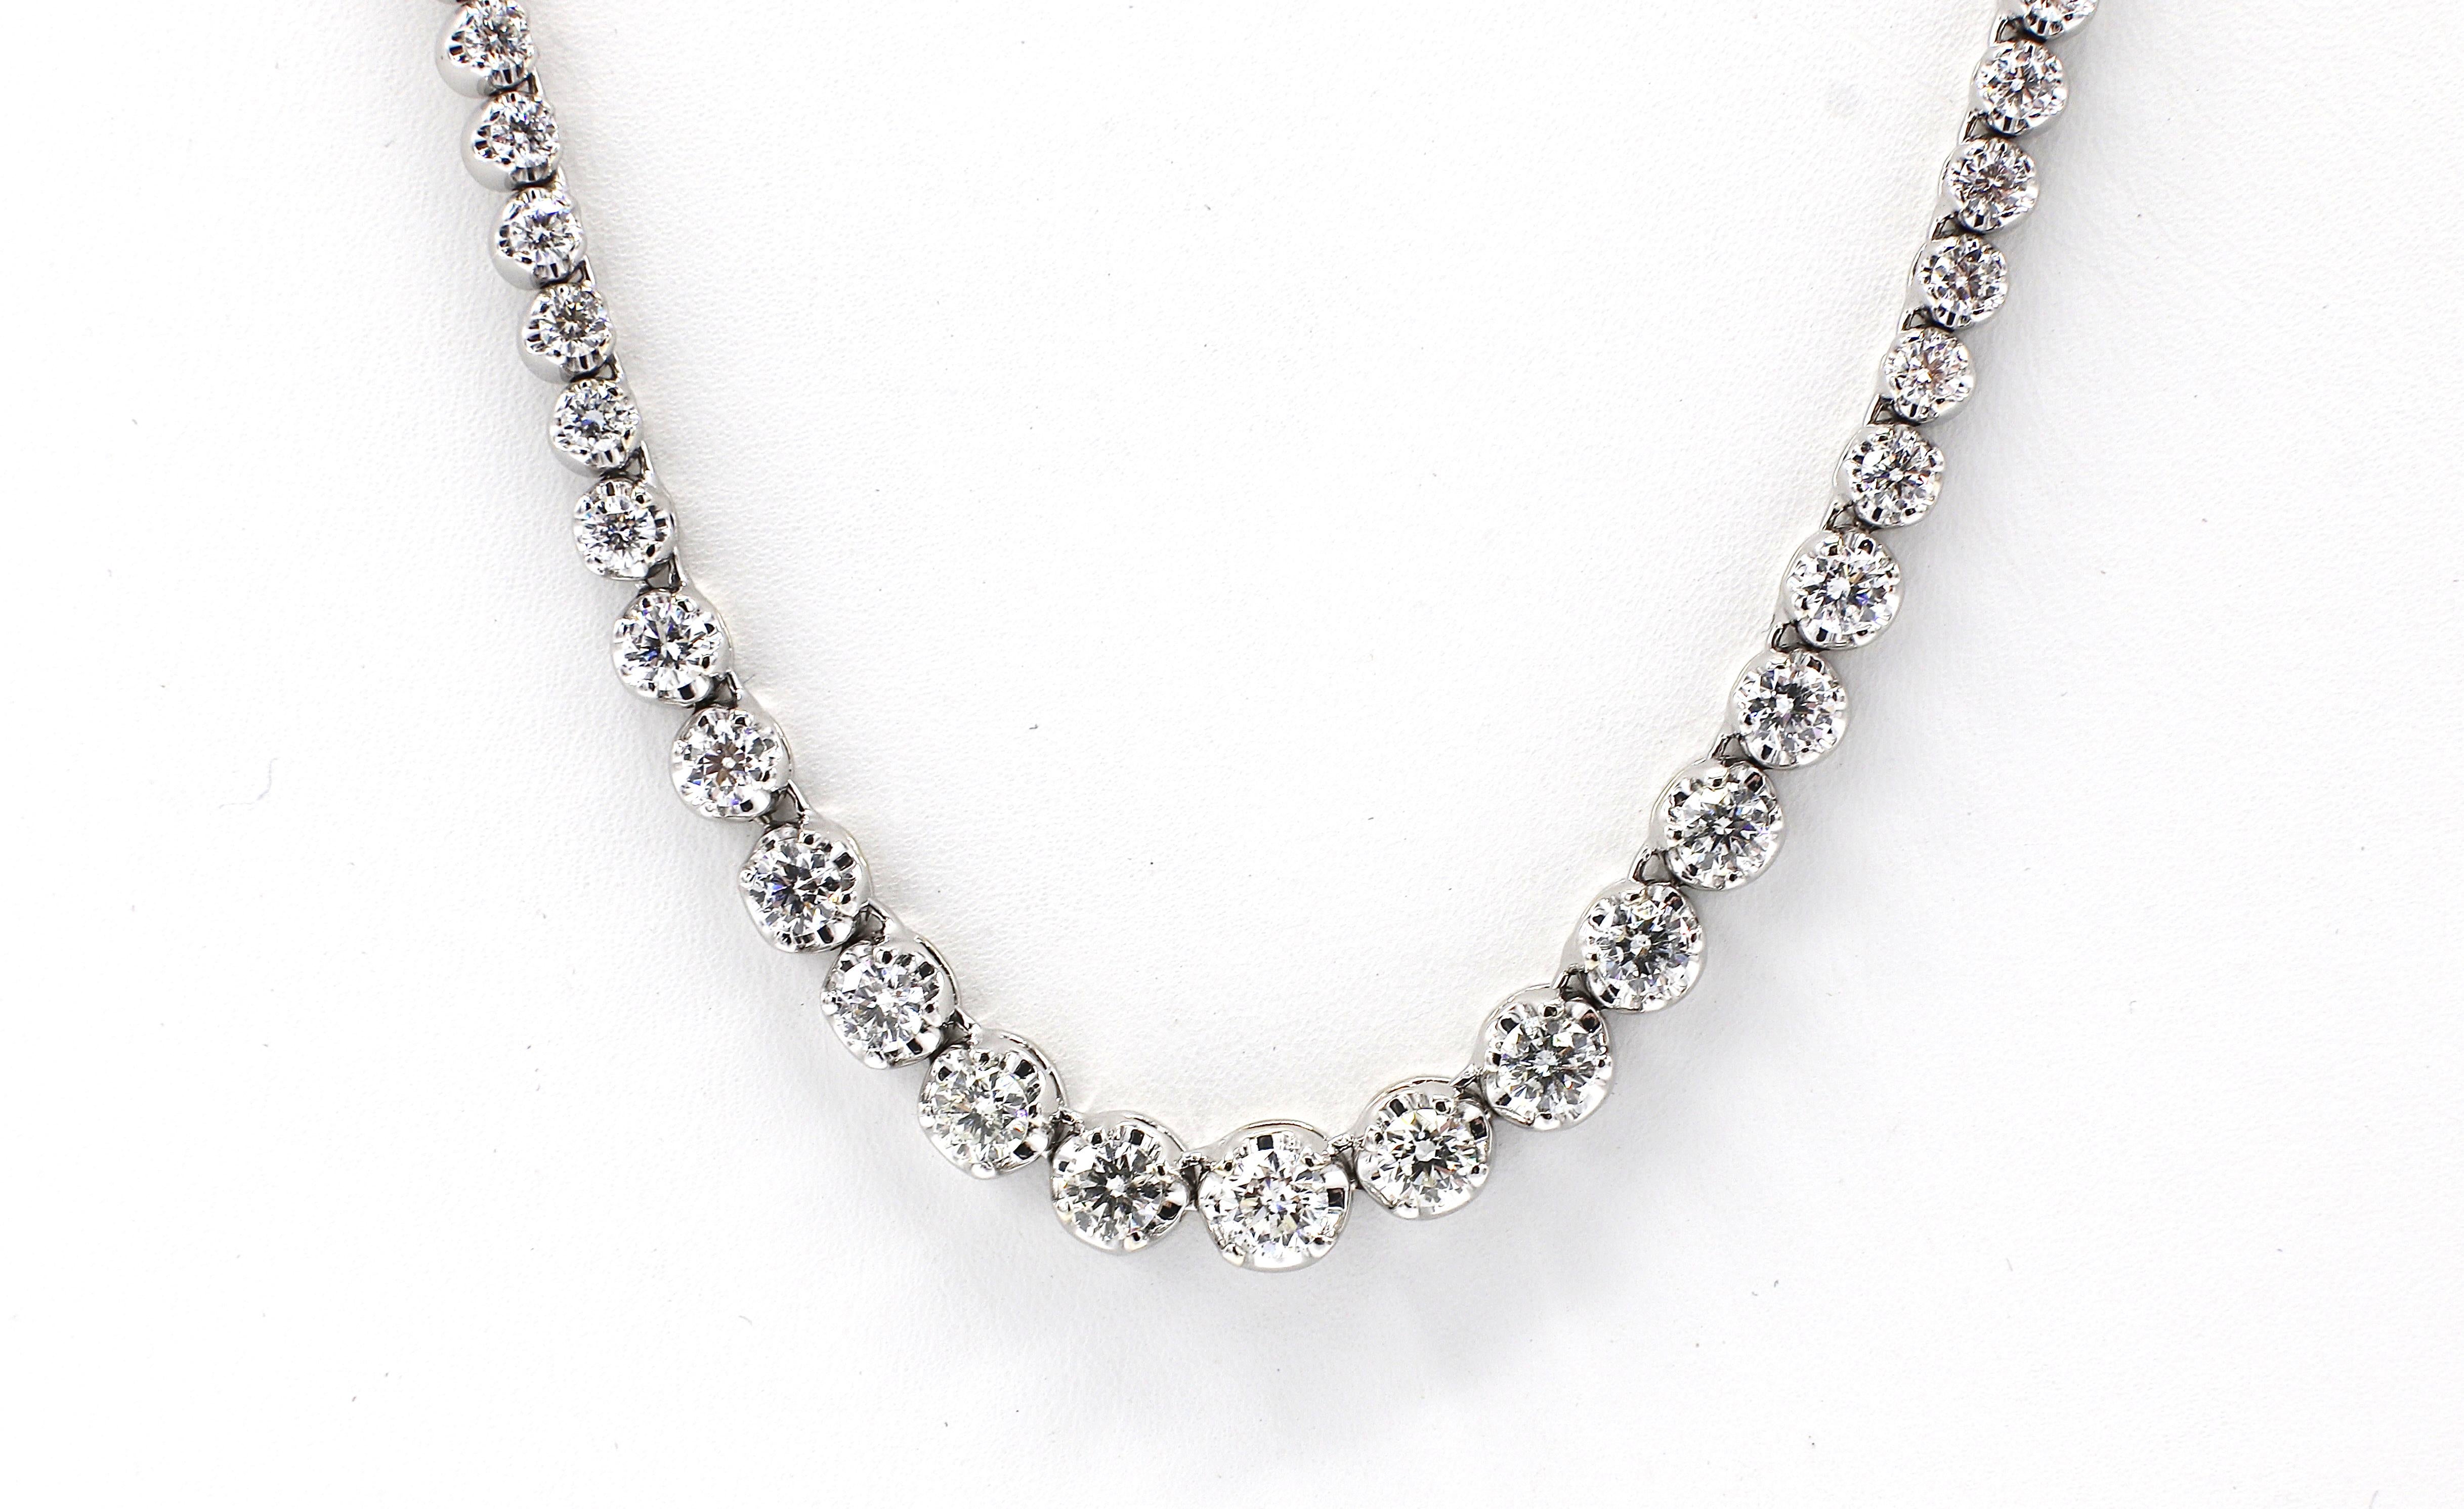 14 Karat White Gold Diamond Riviera Graduated Necklace 
Metal: 14k white gold
Weight: 21 grams
Diamonds: 117 round brilliant cut diamonds, approx. 7 CTW G VS-SI. Diamonds range from .01cts to .25ct
Length: 17 inches 
